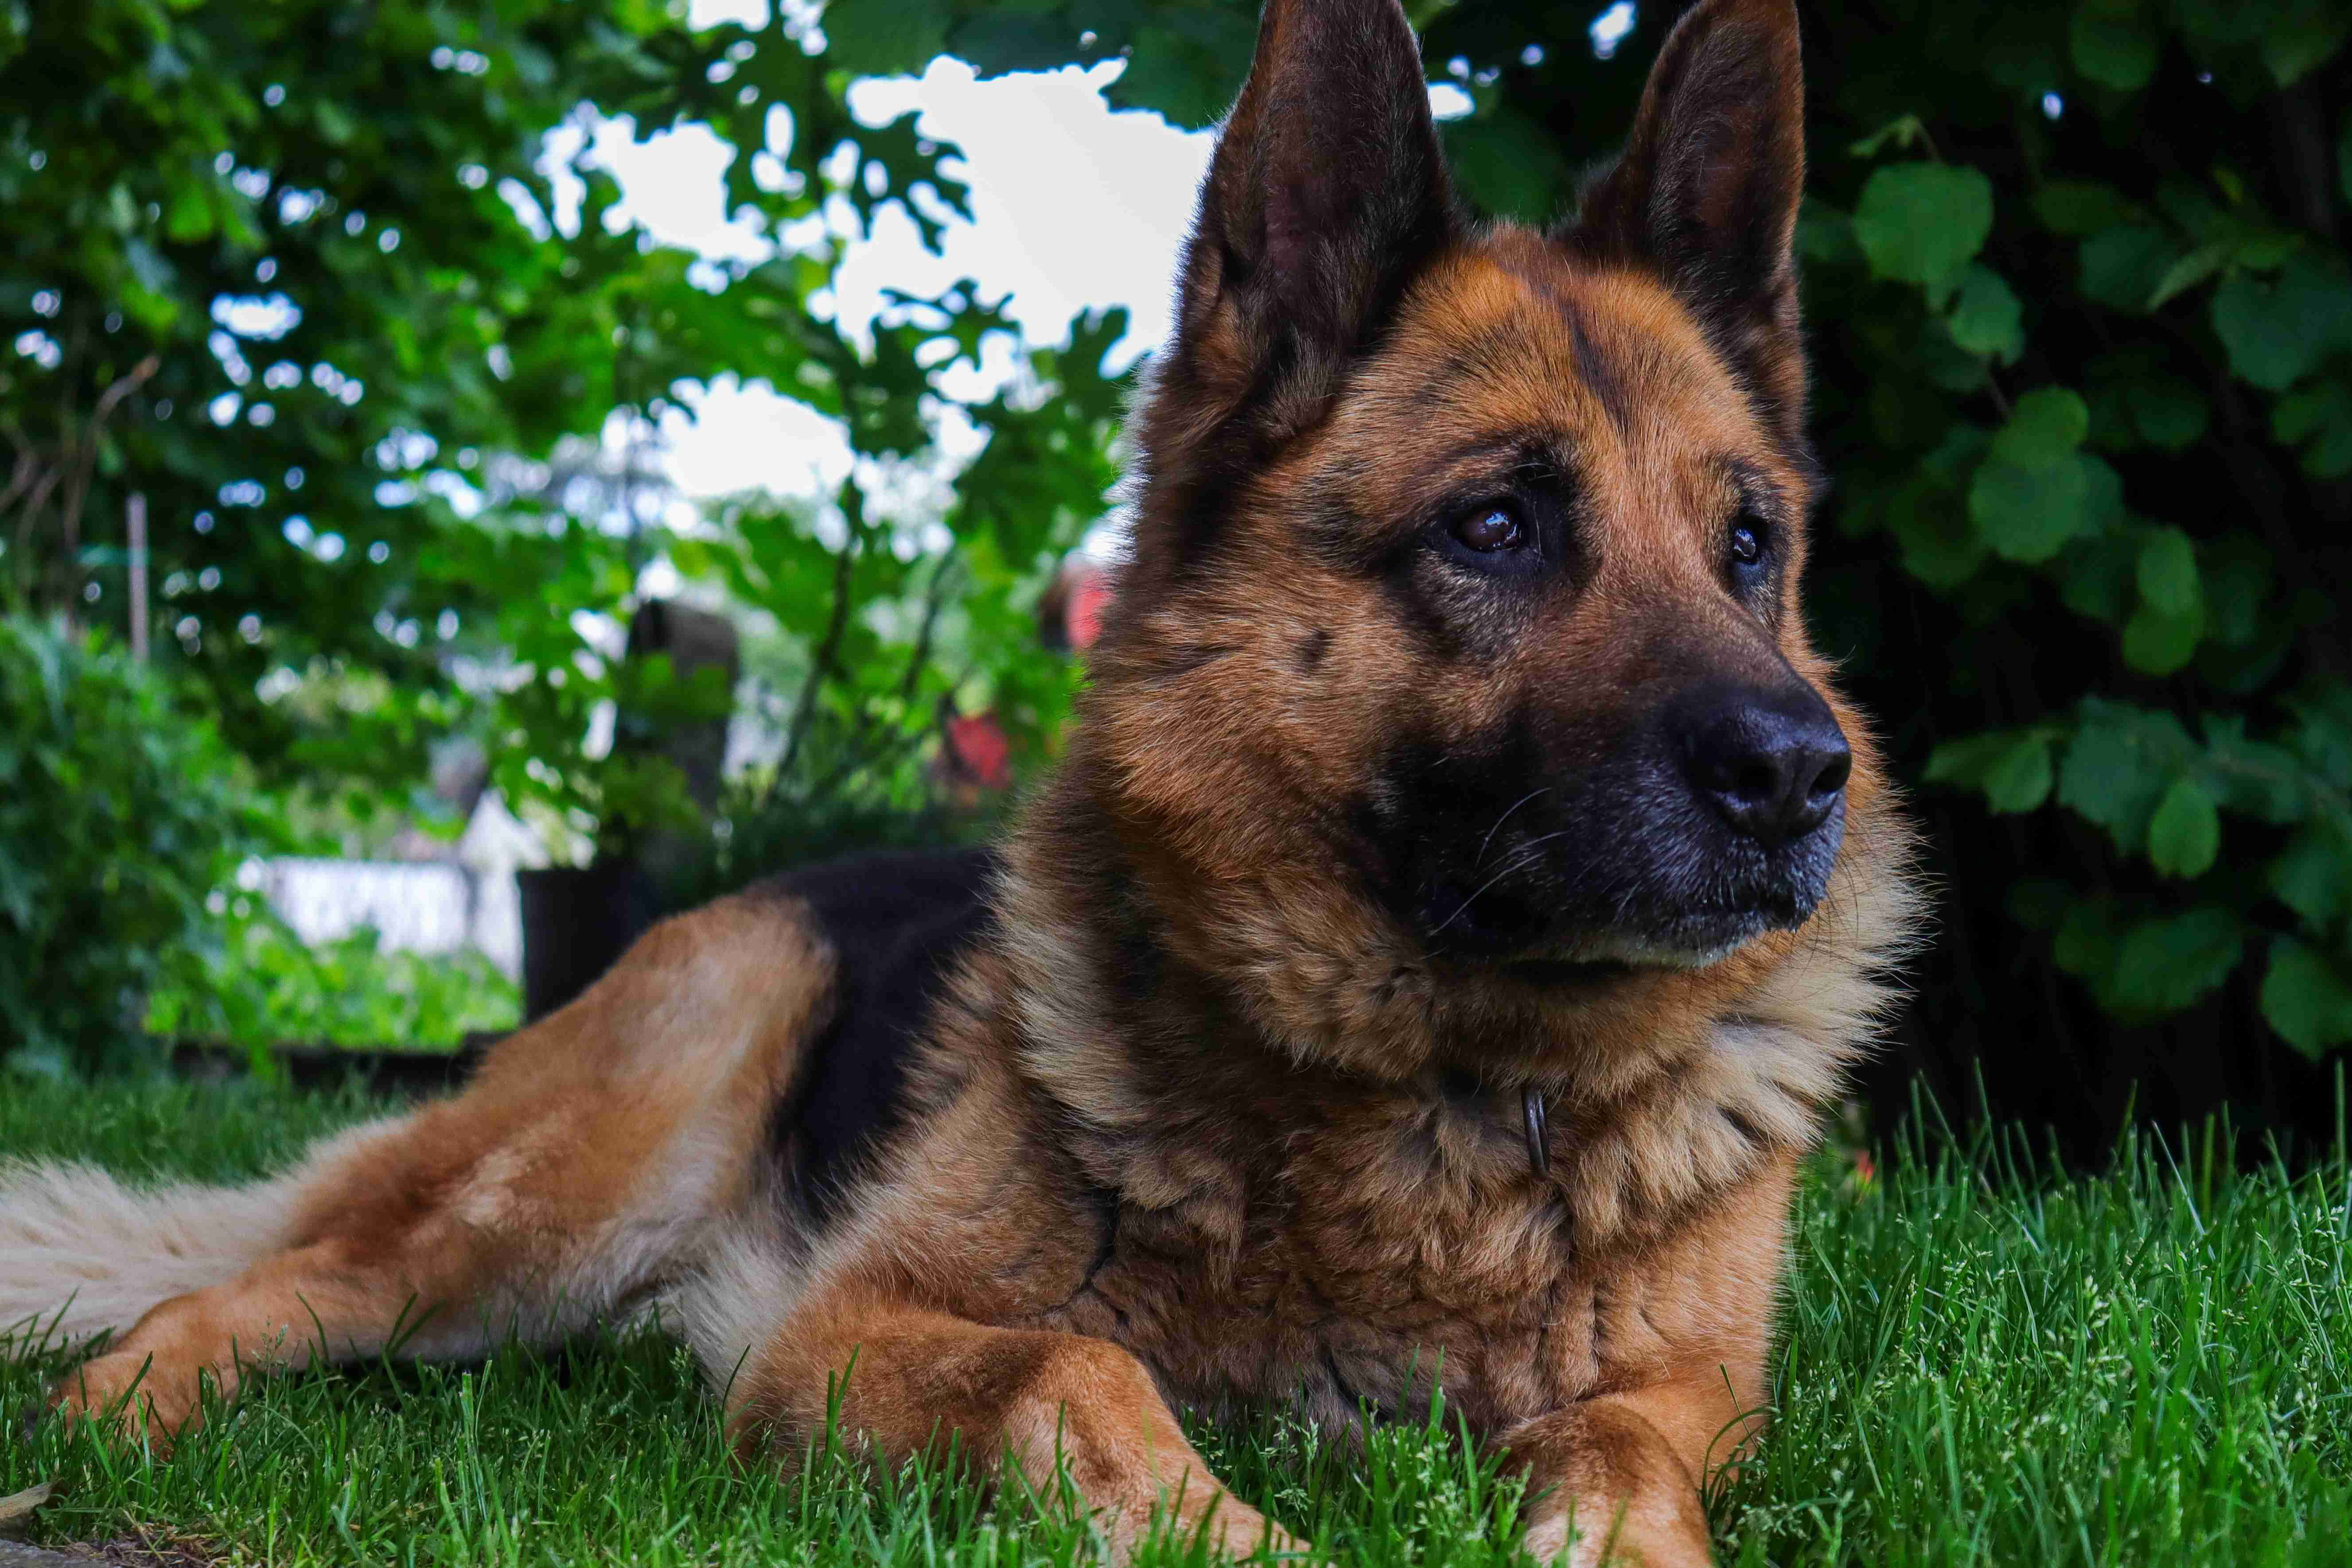 Can German shepherds be trained to track scents?